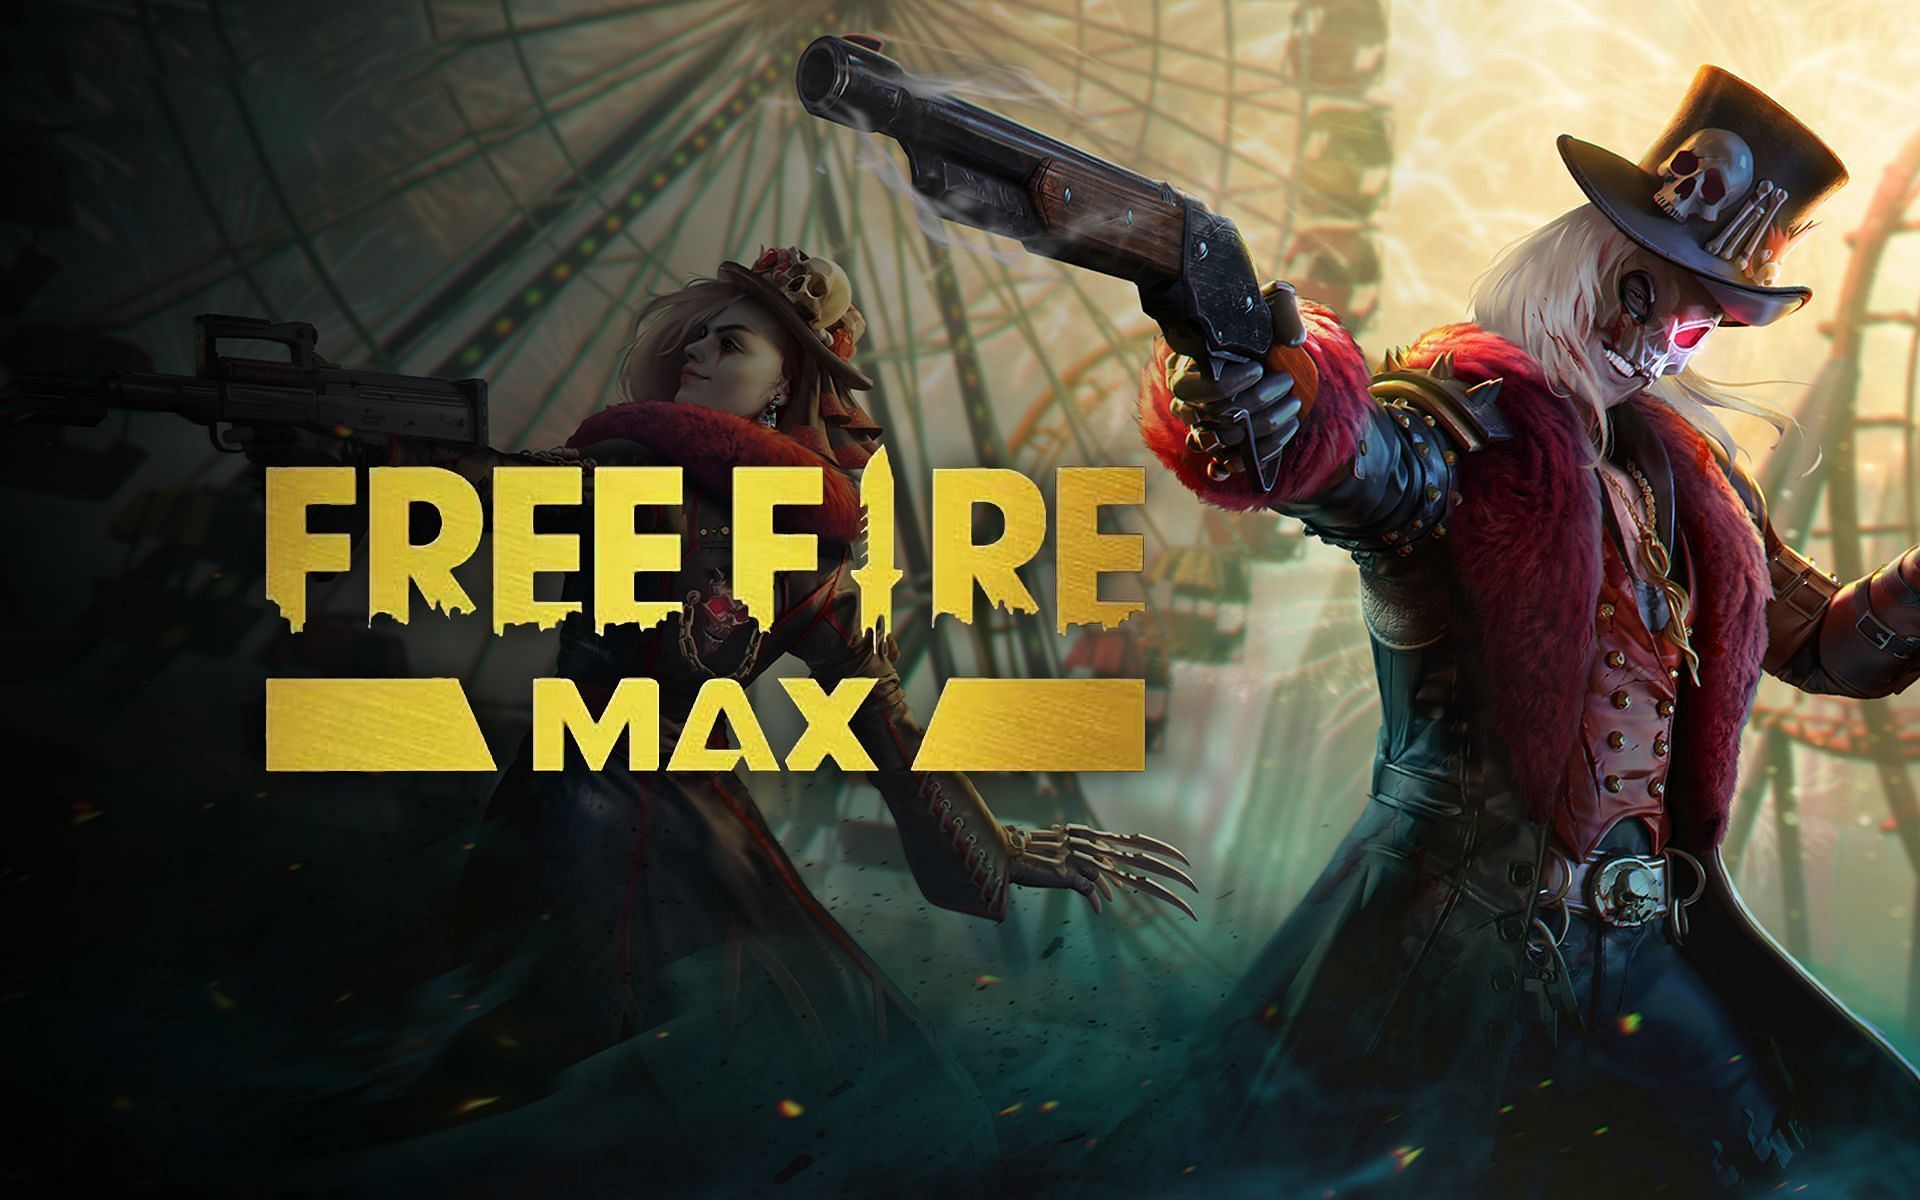 How to install the latest APK version of Free Fire MAX? (Image via Sportskeeda)